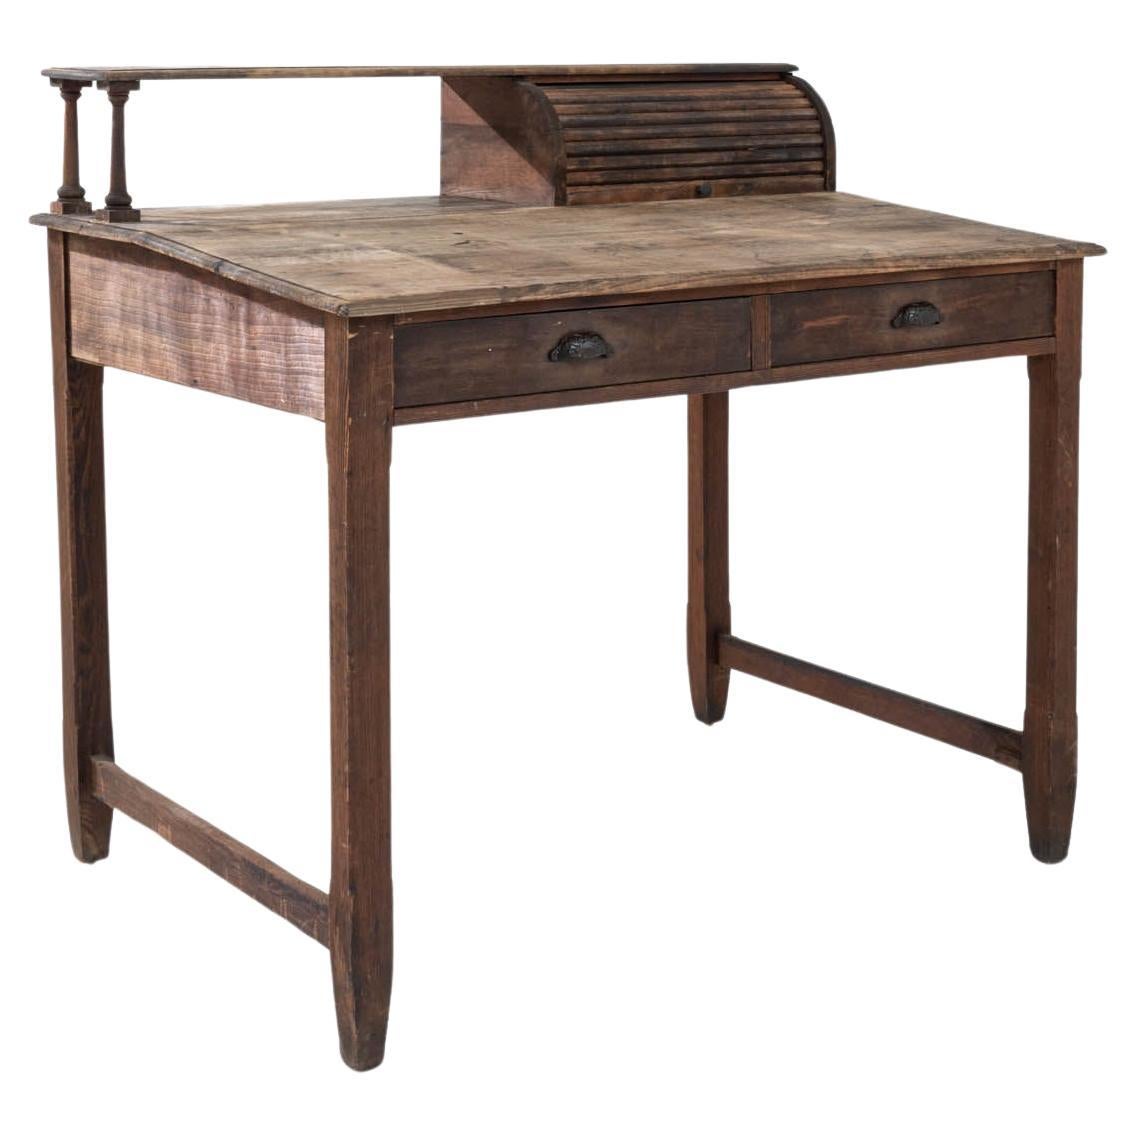 Turn of the Century French Wooden Desk